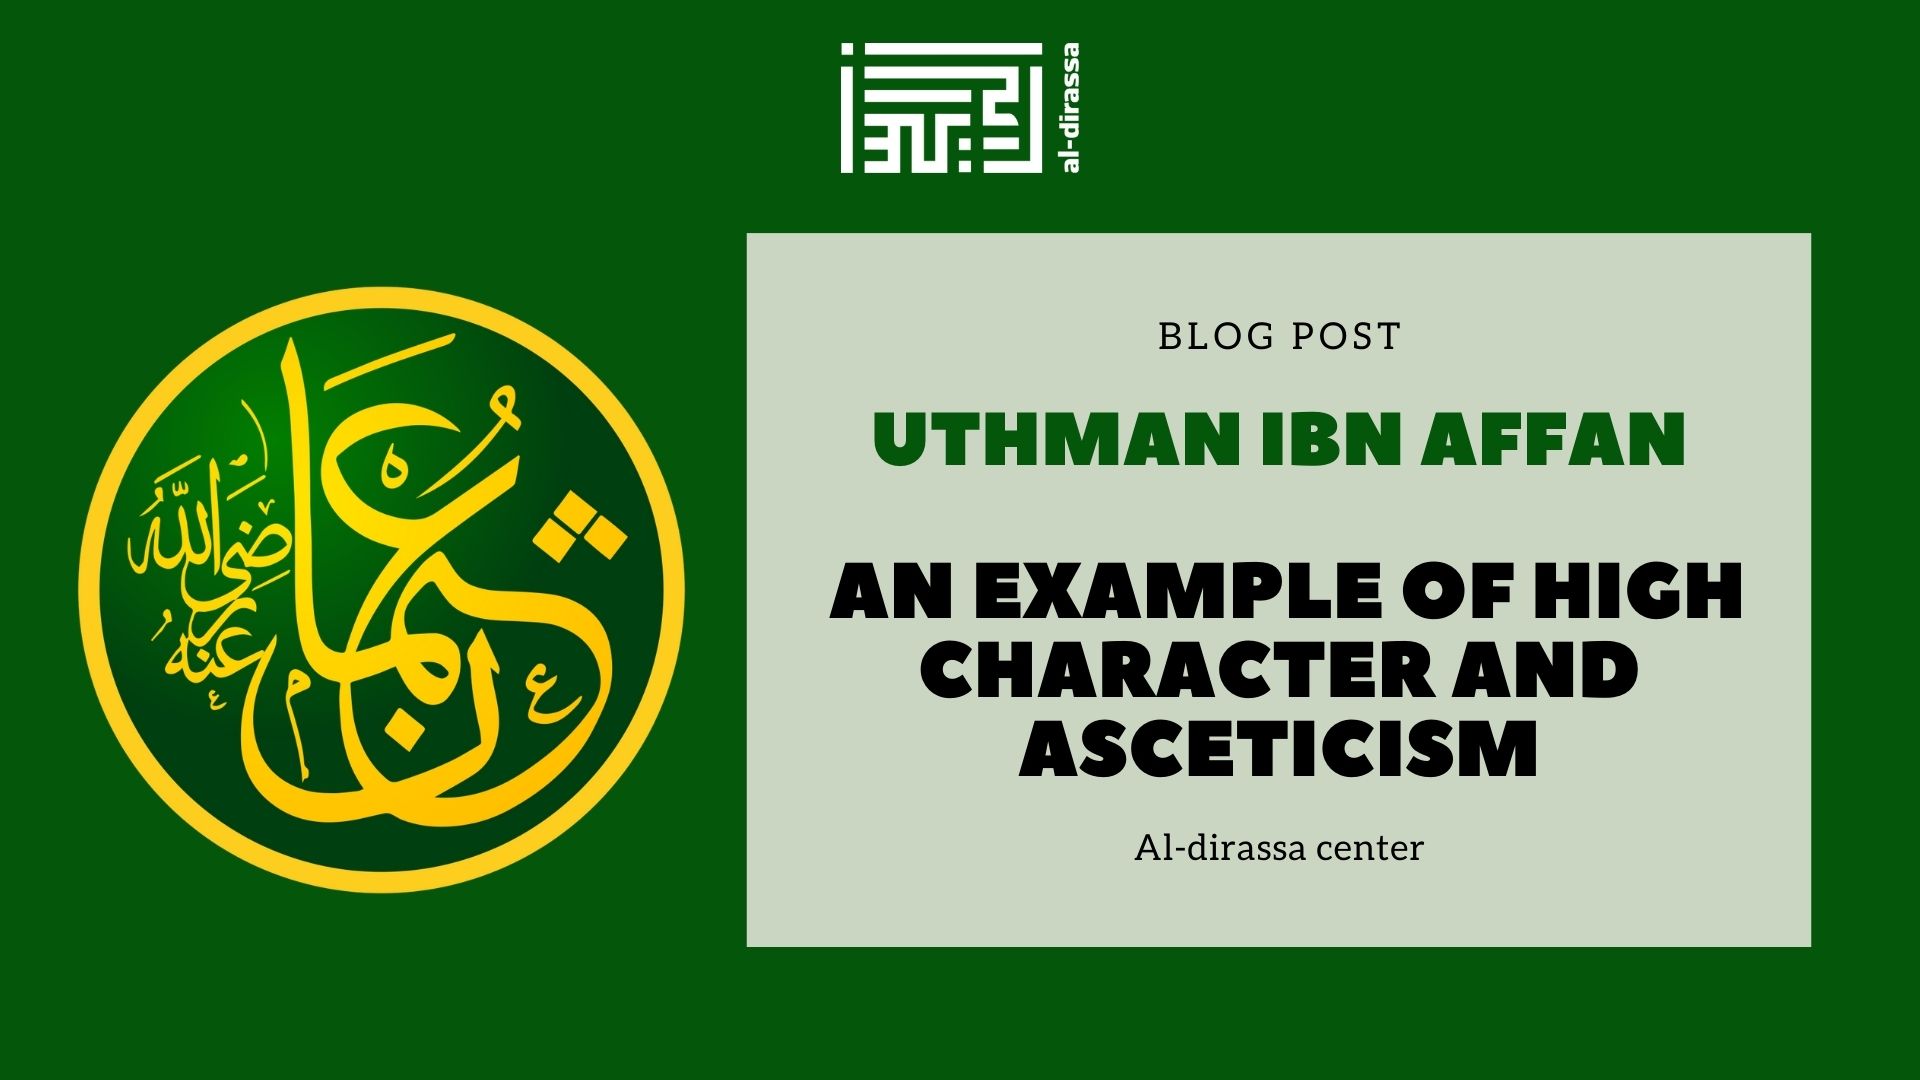 Uthman ibn Affan: An Example of High Character and Asceticism